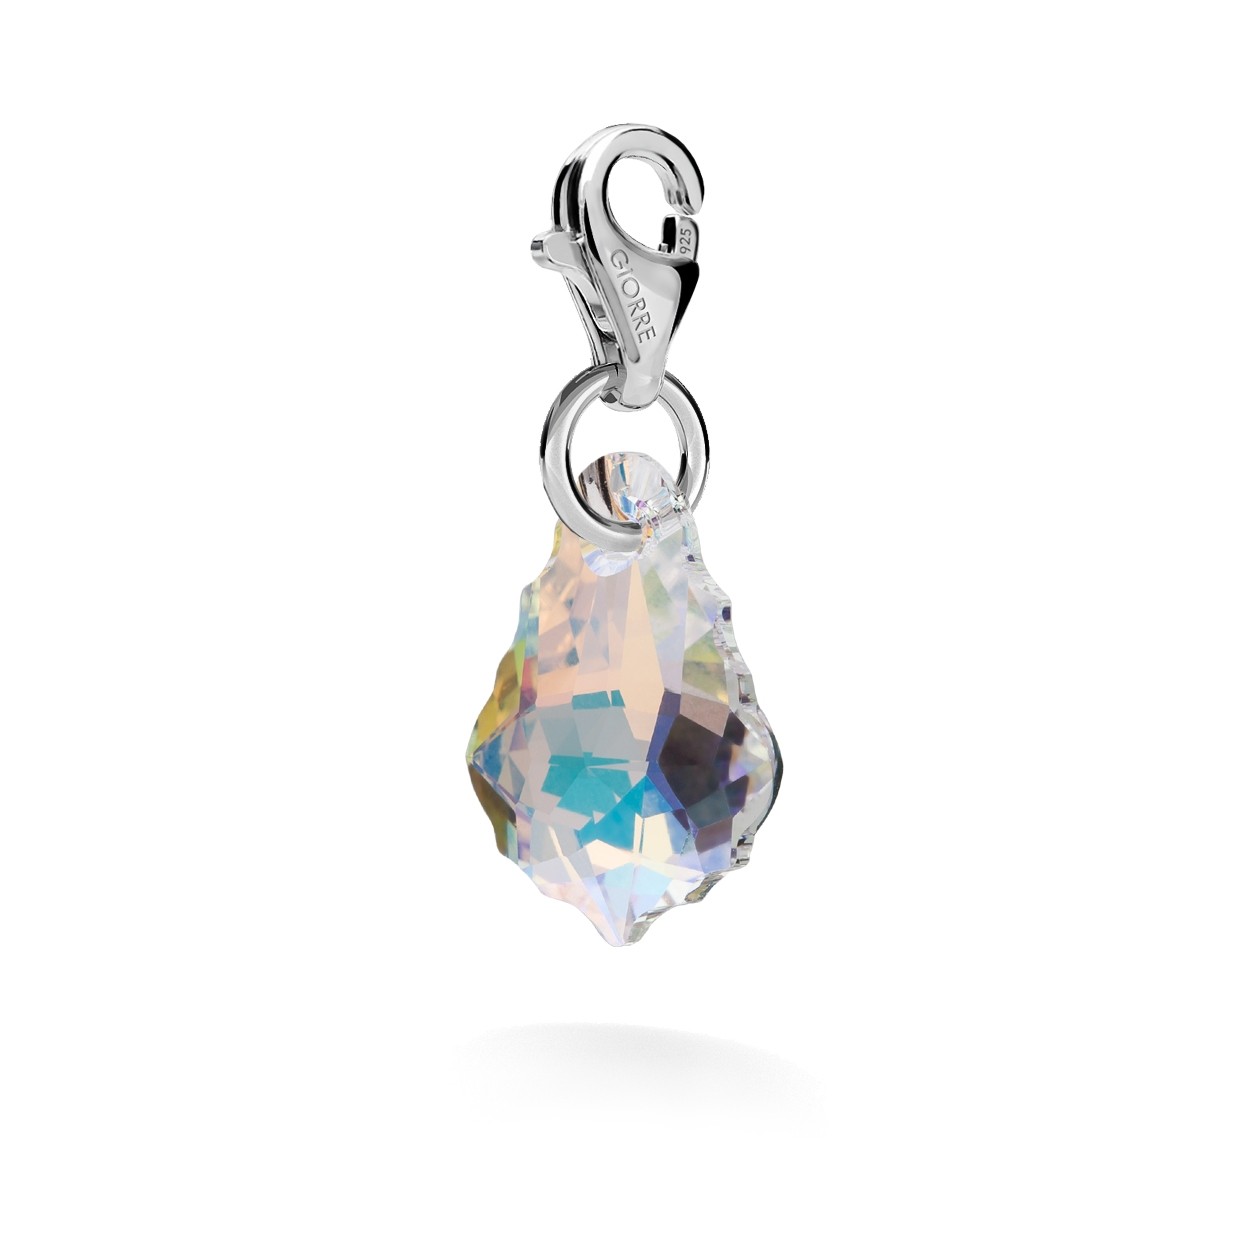 CHARMS 48, SWAROVSKI 6090 MM 16, STERLING SILVER (925) RHODIUM OR GOLD PLATED